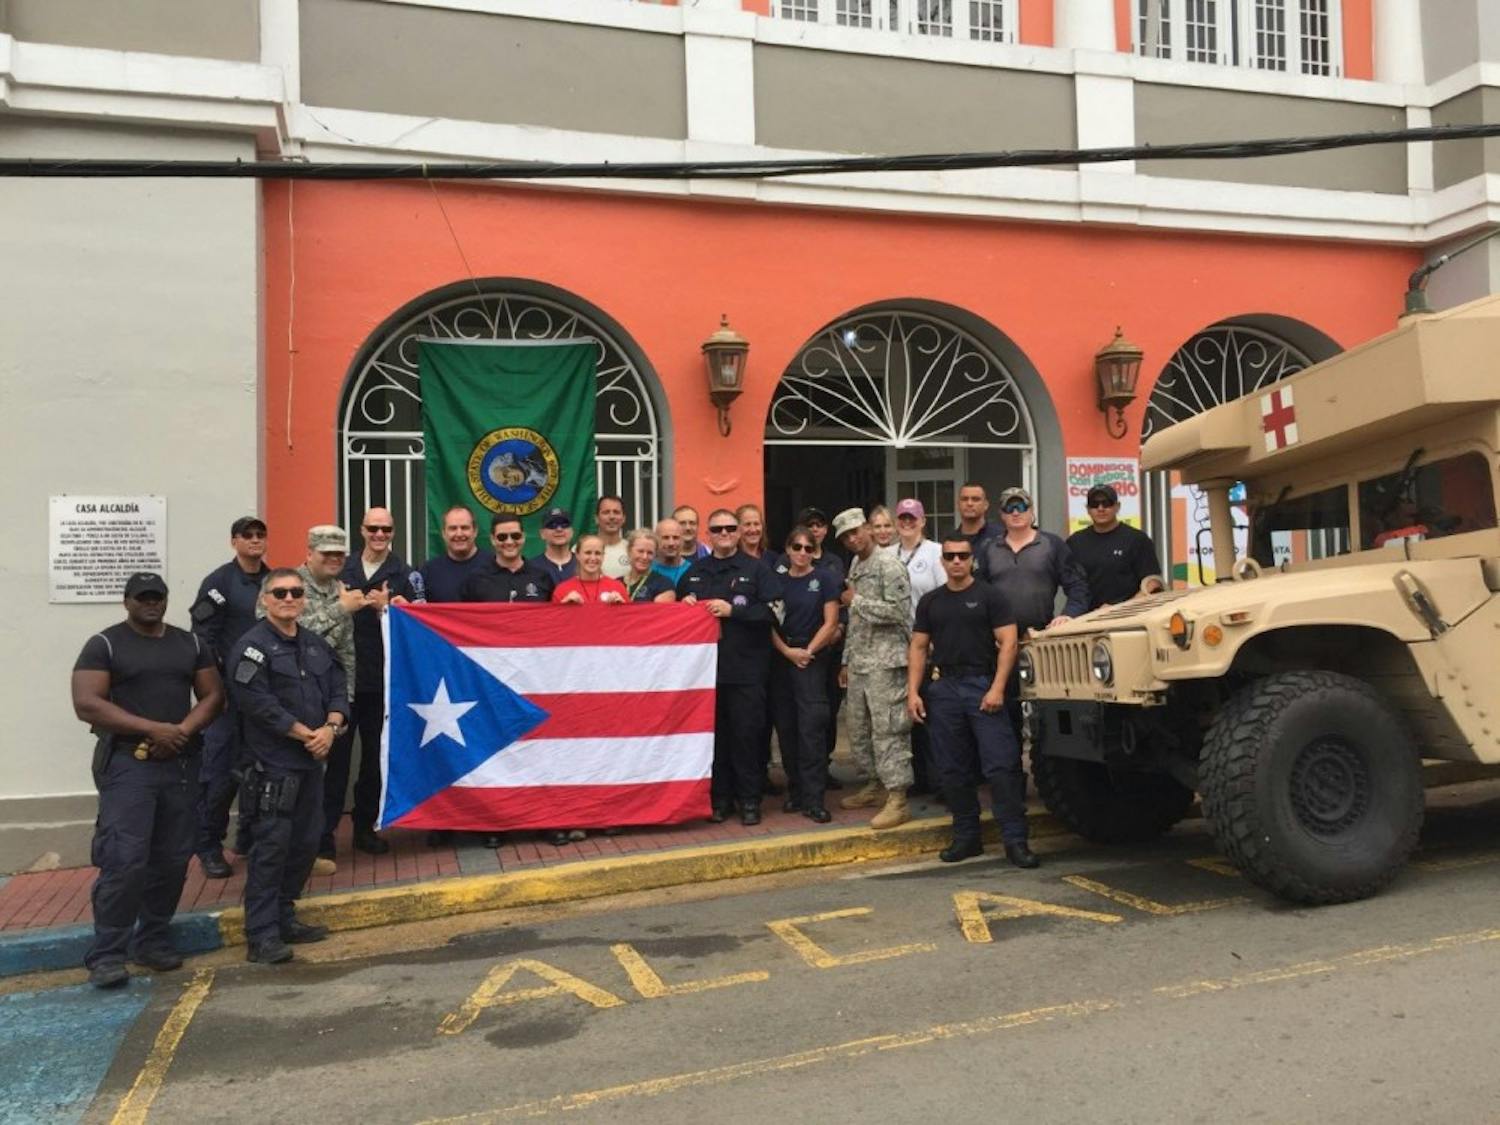 Jennifer Kelly and her team in Puerto Rico pose with Puerto Rican flag. They arrived in Puerto Rico to provide medical assistance and set up a clinic. Photo courtesy of Kelly.